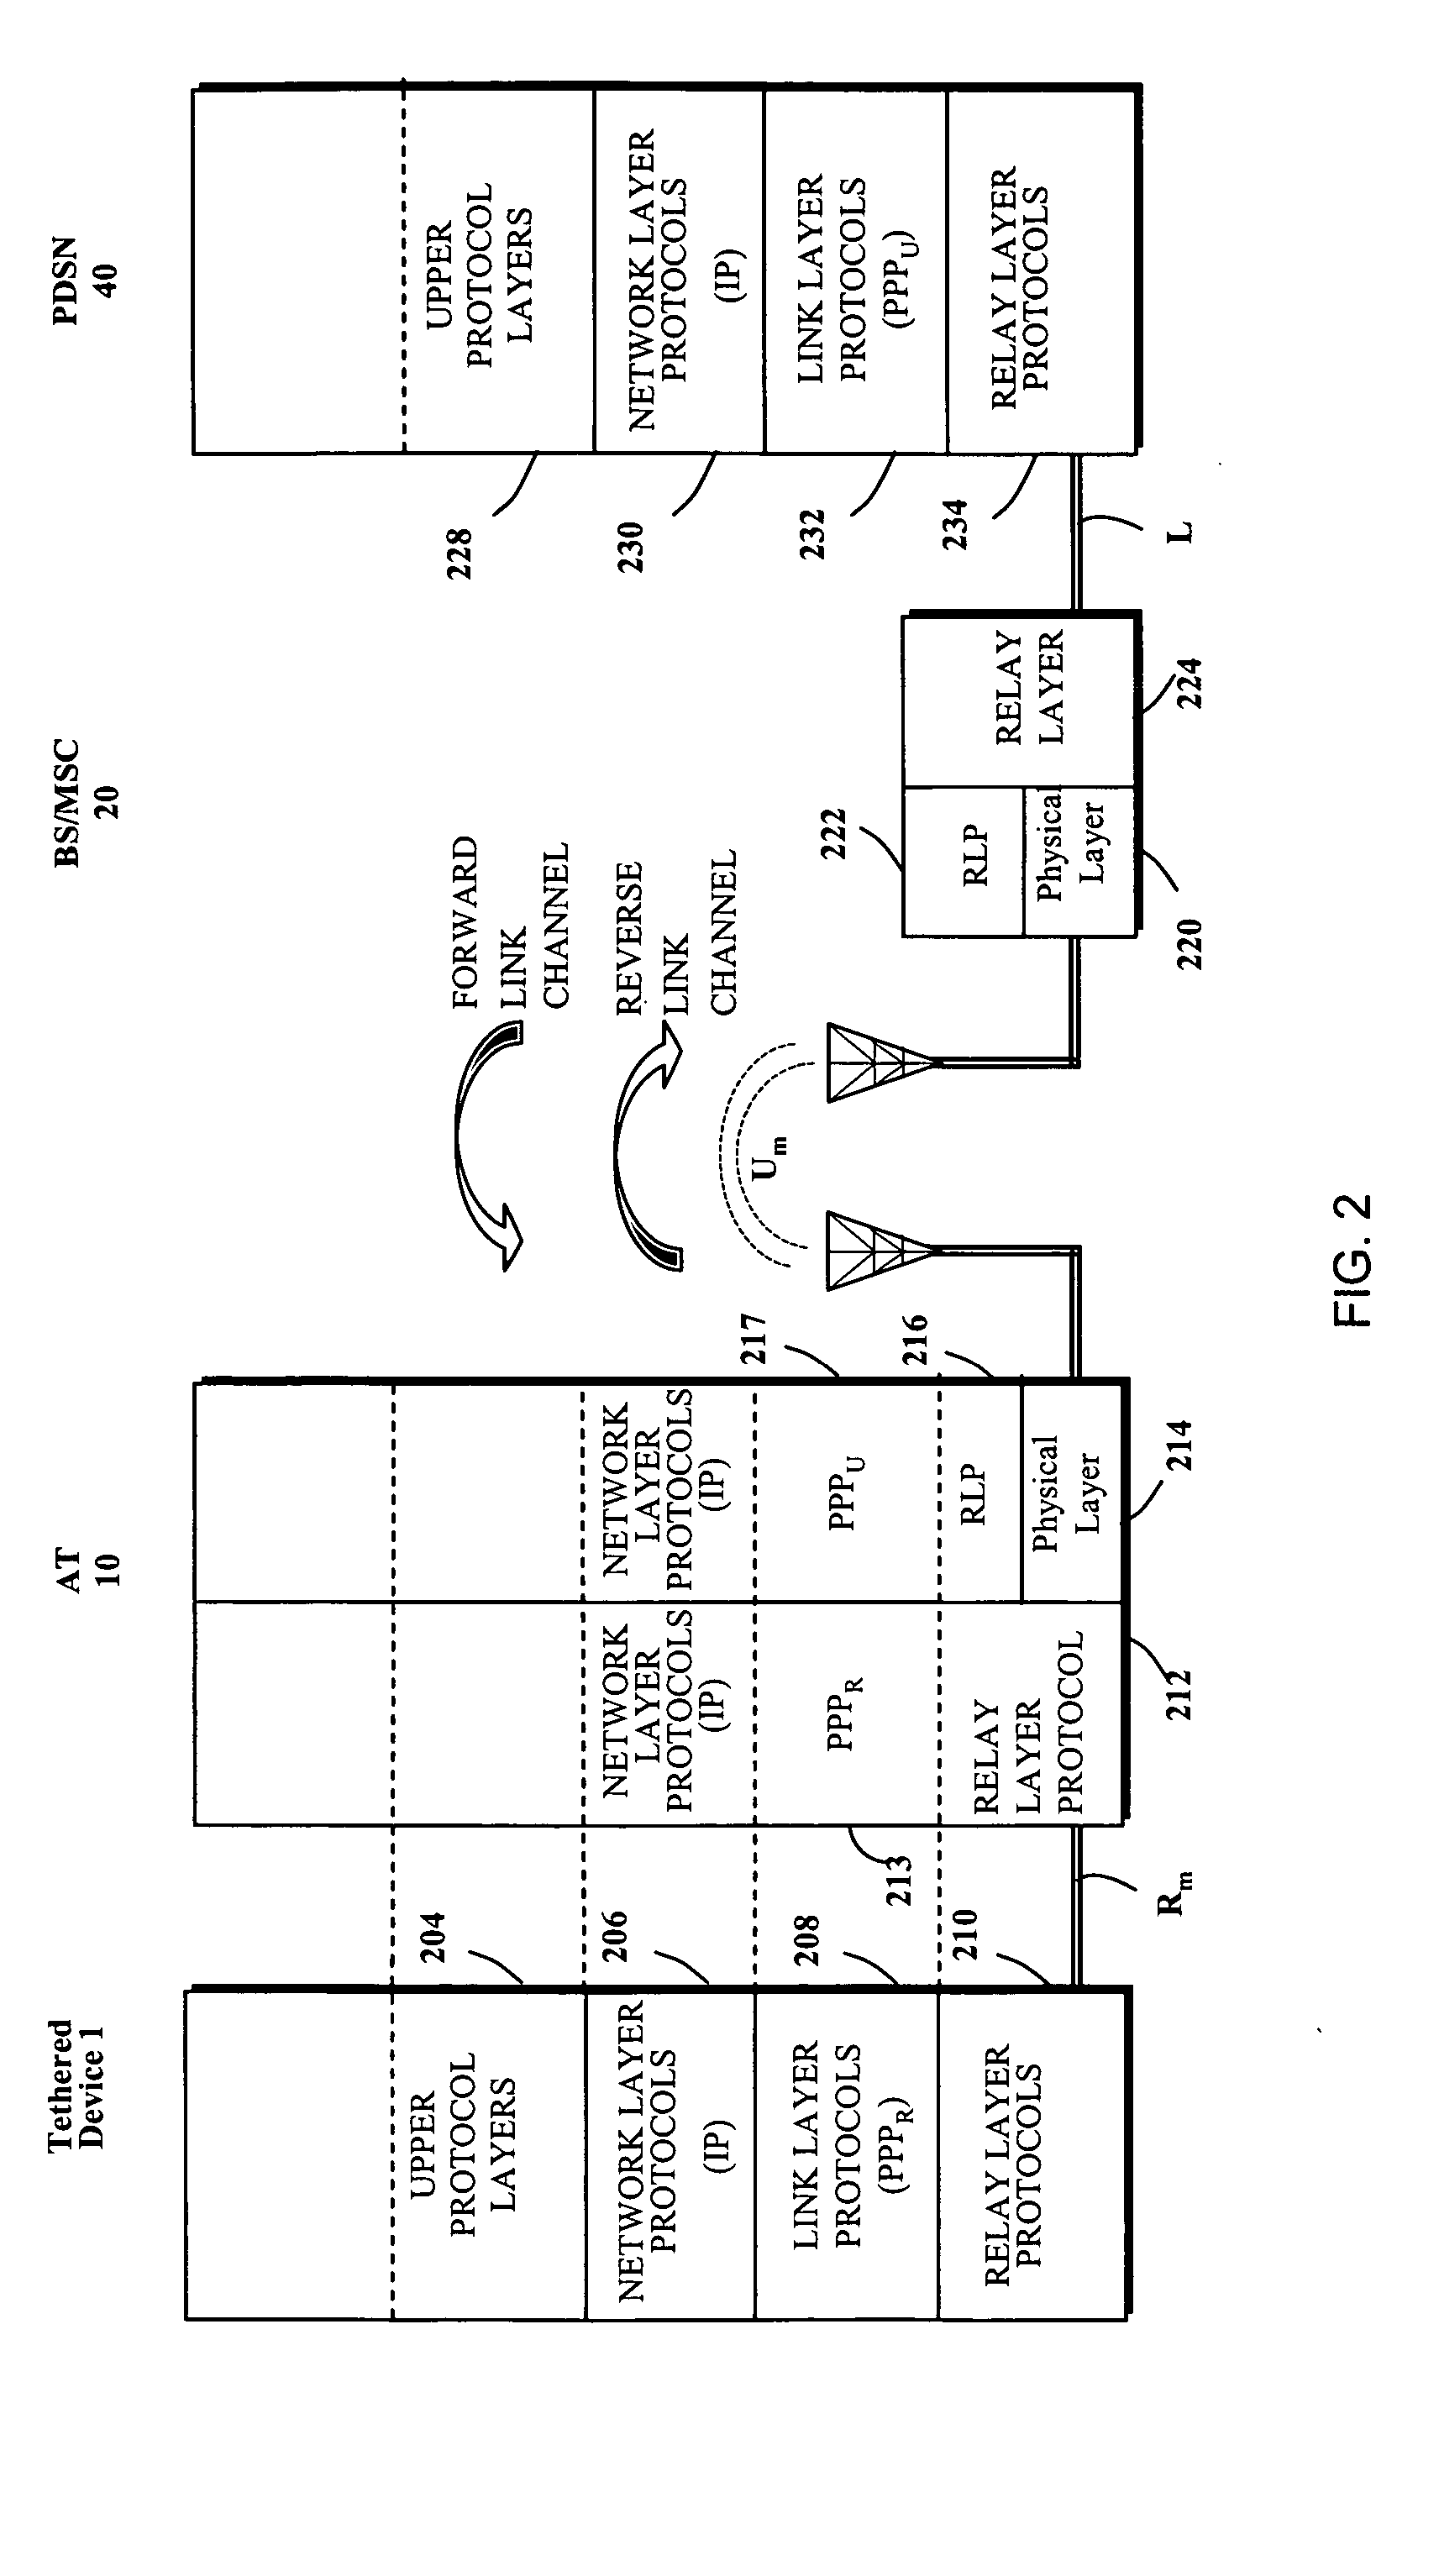 Maintaining data connectivity for handoffs between compression-enabled and compression-disabled communication systems